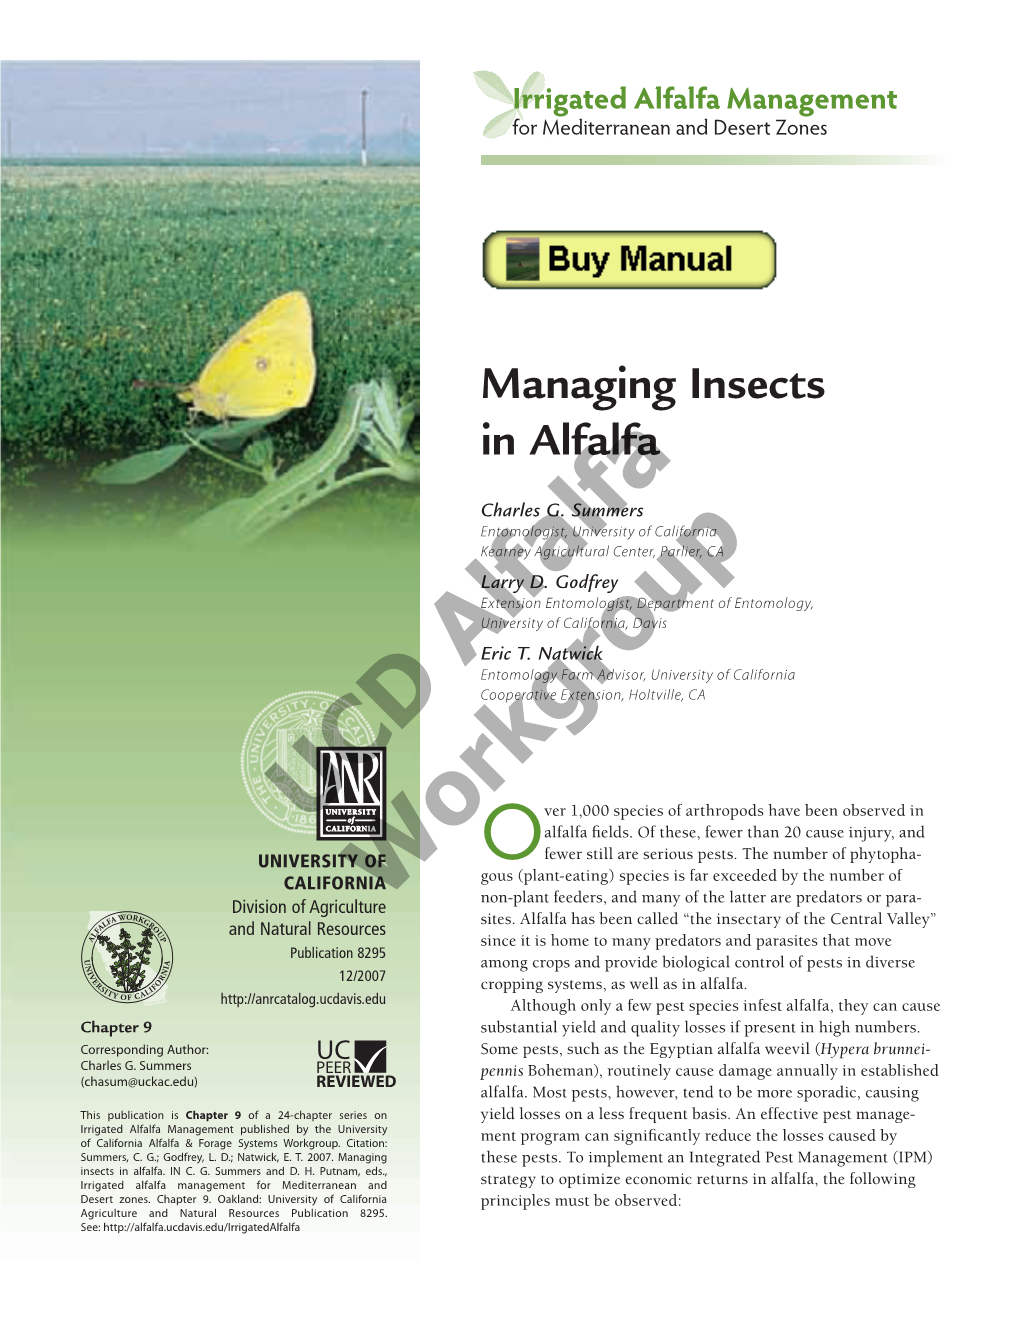 Managing Insects in Alfalfa